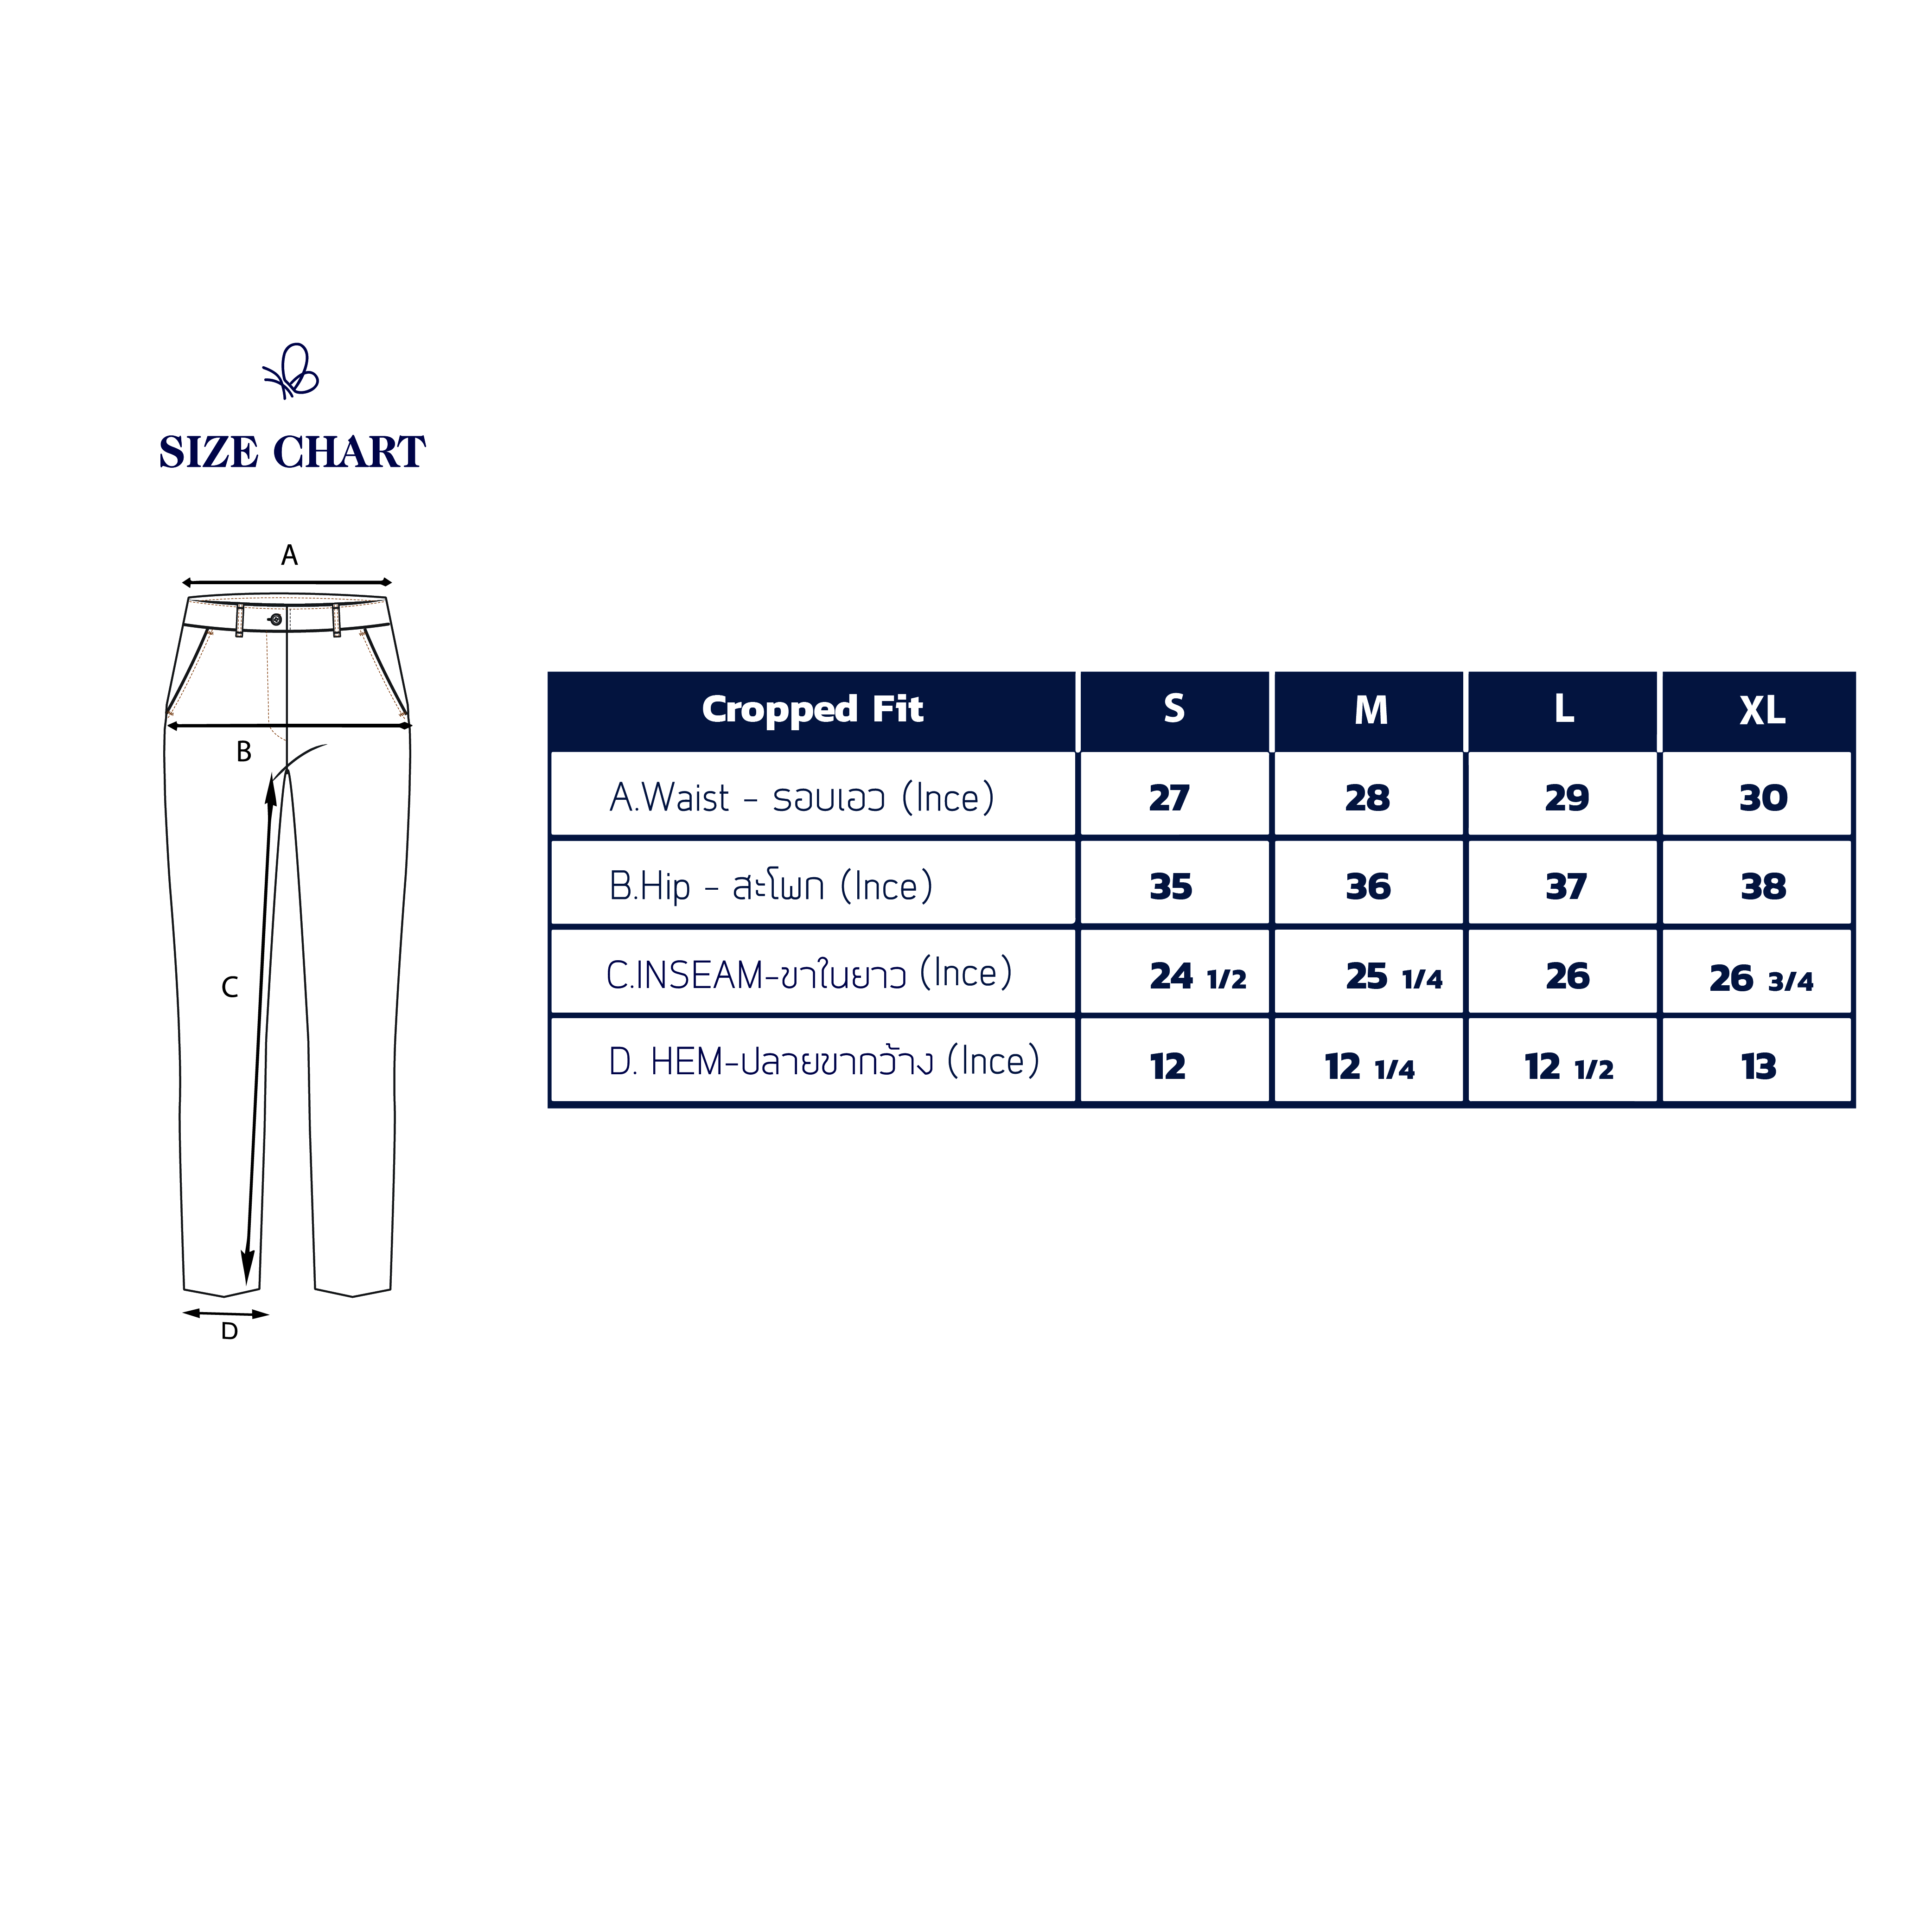 SIZE-Cropped_Fit-new_1